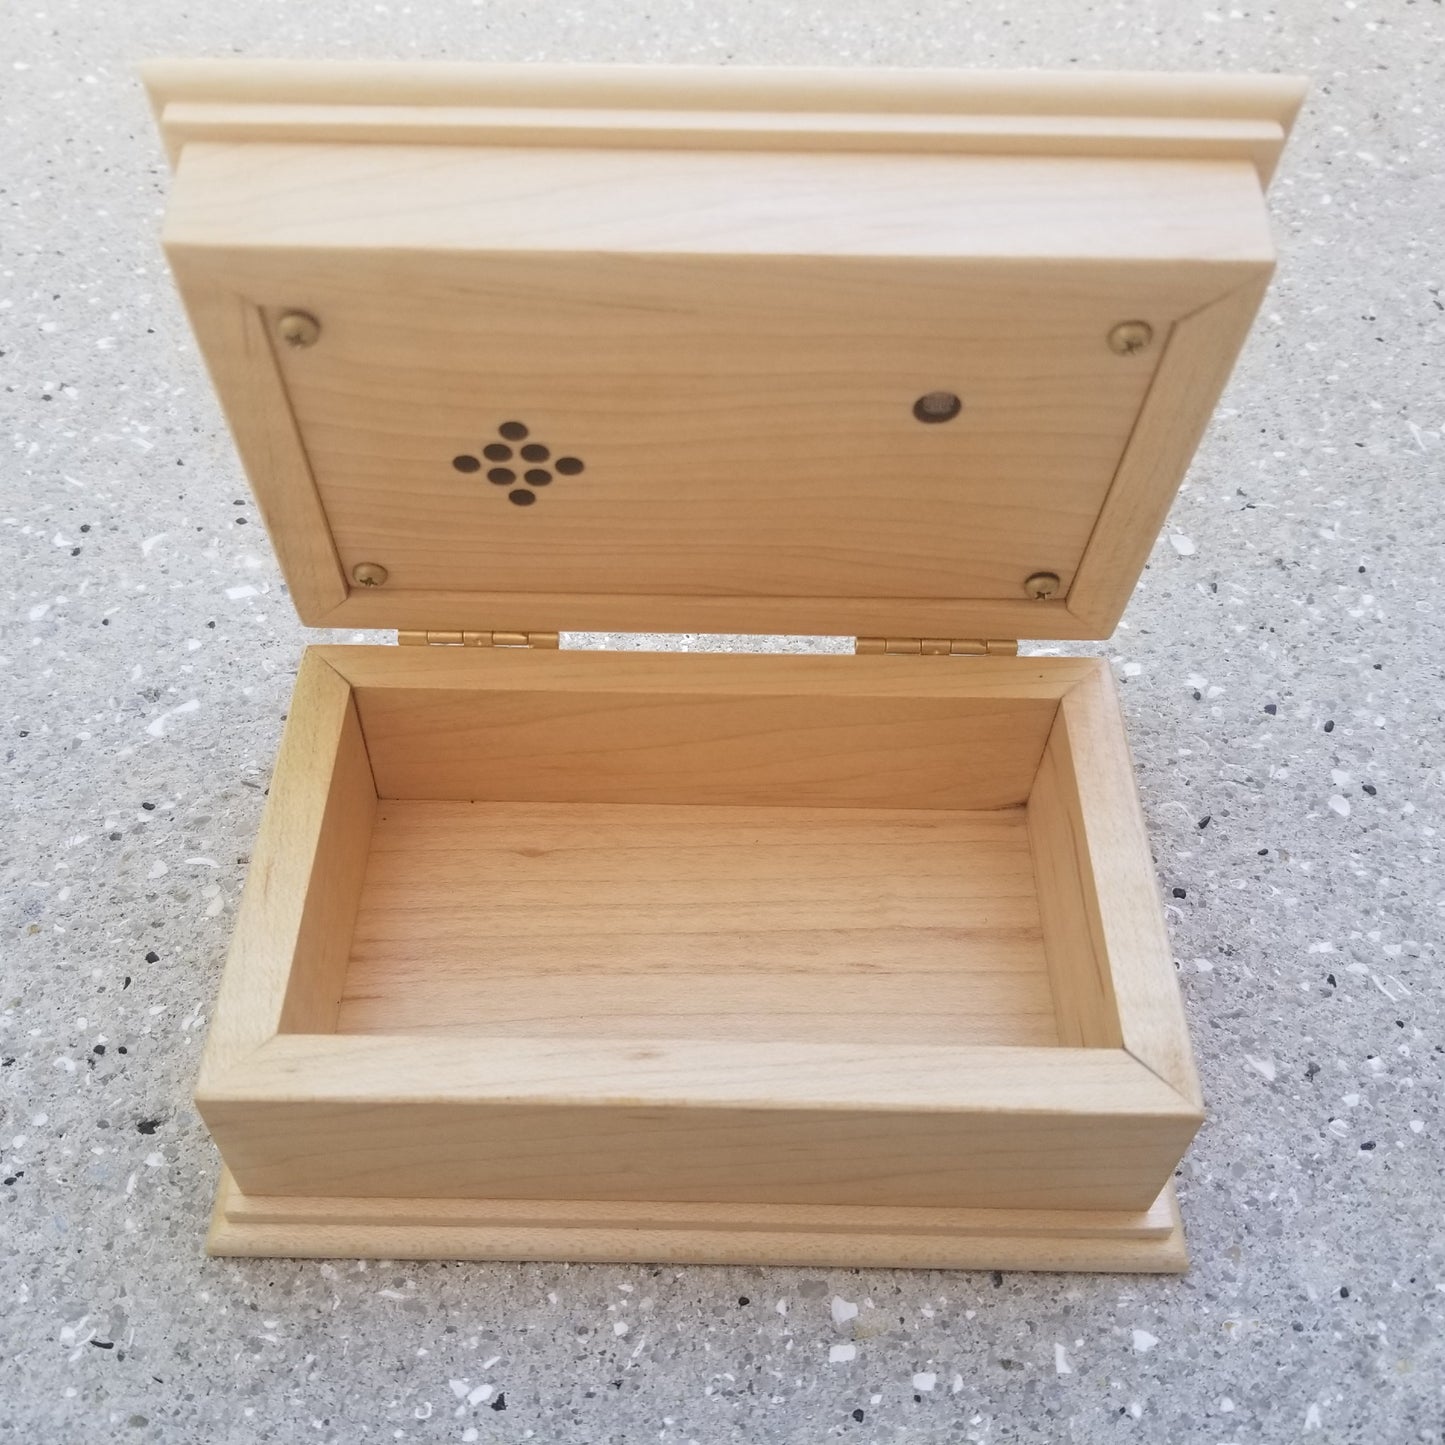 Jewelry Box Custom Song with open lid showing light sensor and speakers under the lid, made of high quality maple wood in the US